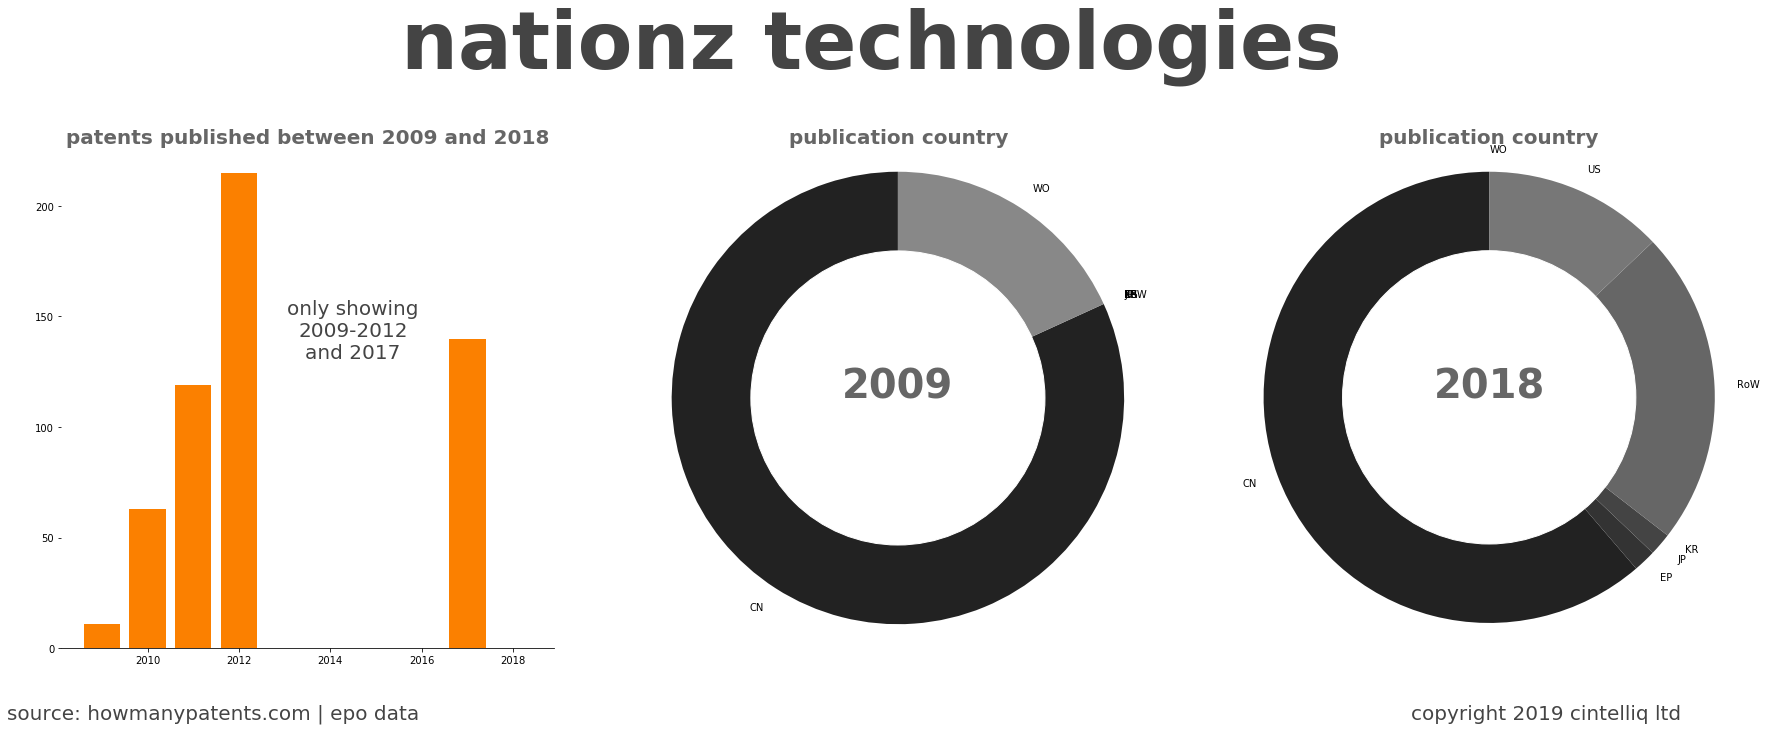 summary of patents for Nationz Technologies